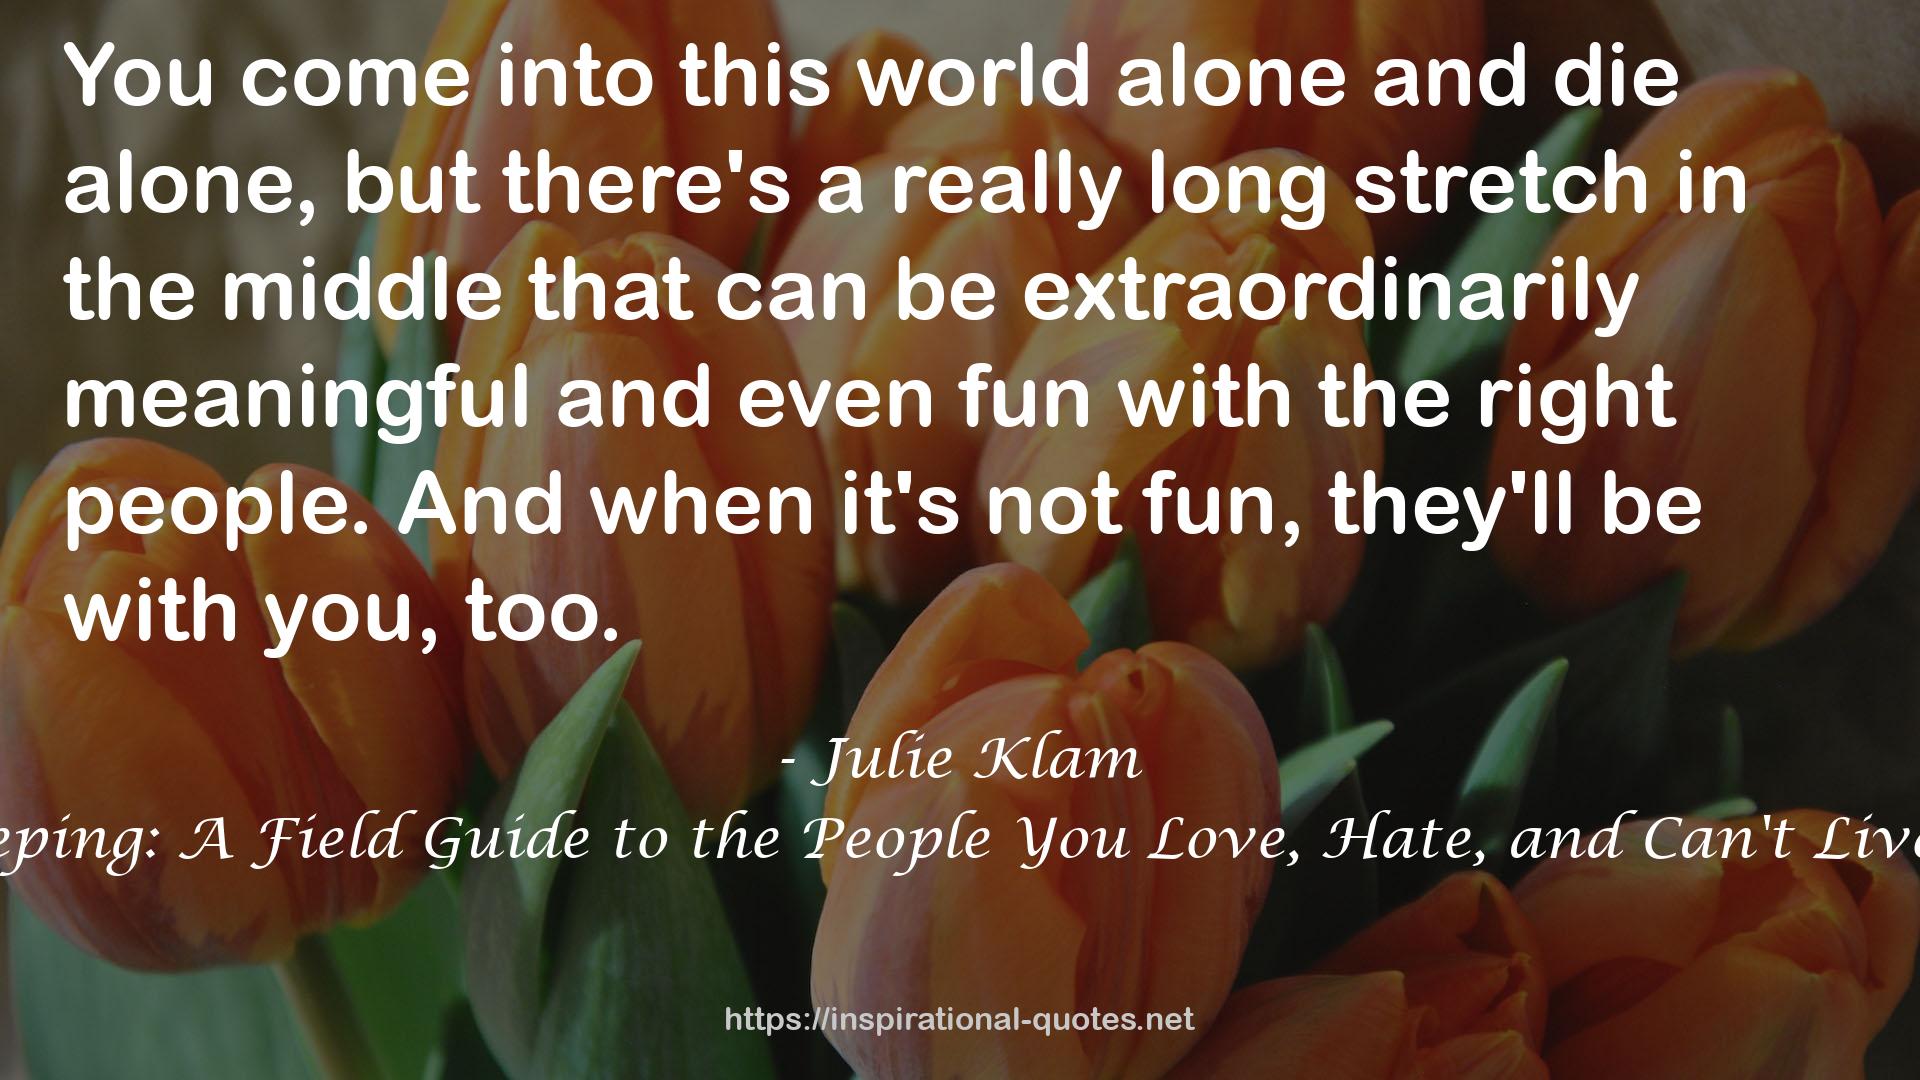 Friendkeeping: A Field Guide to the People You Love, Hate, and Can't Live Without QUOTES